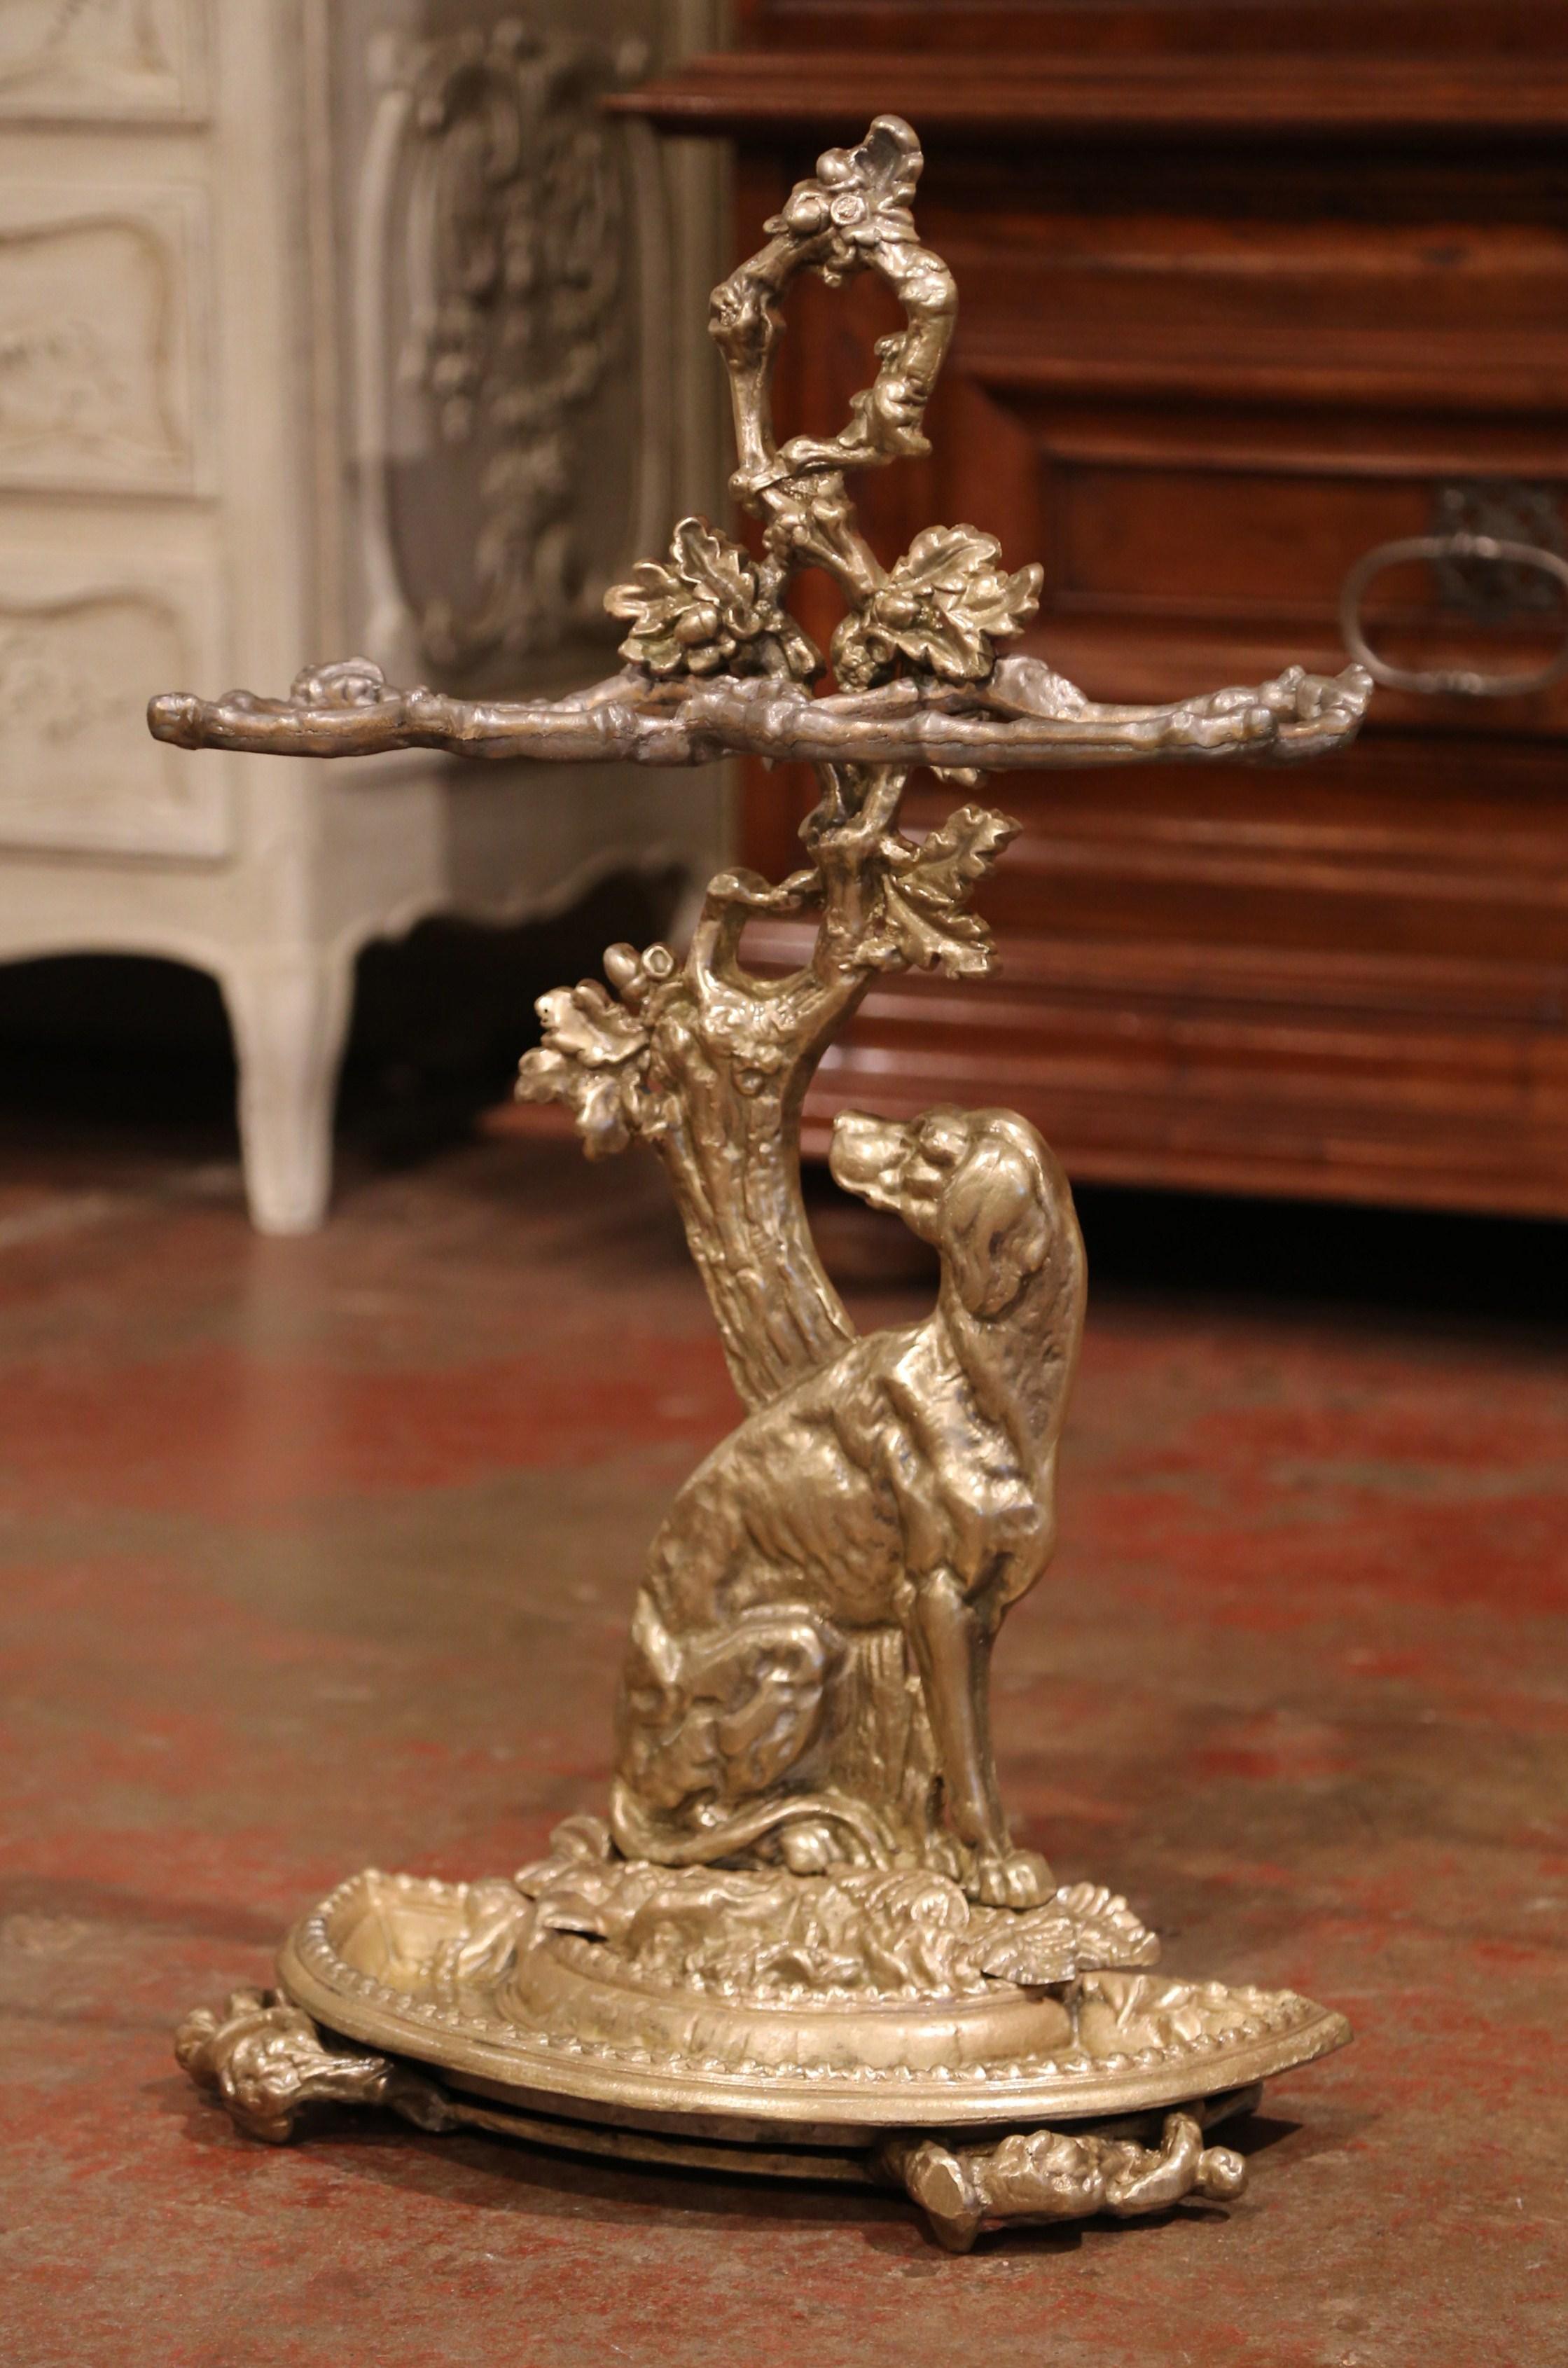 Decorate an entry with this elegant antique umbrella or cane stand; crafted in France, circa 1870, the freestanding stand features a hunt dog figure leaning against a tree decorated with foliage at the base. The stand sits on four small feet shaped